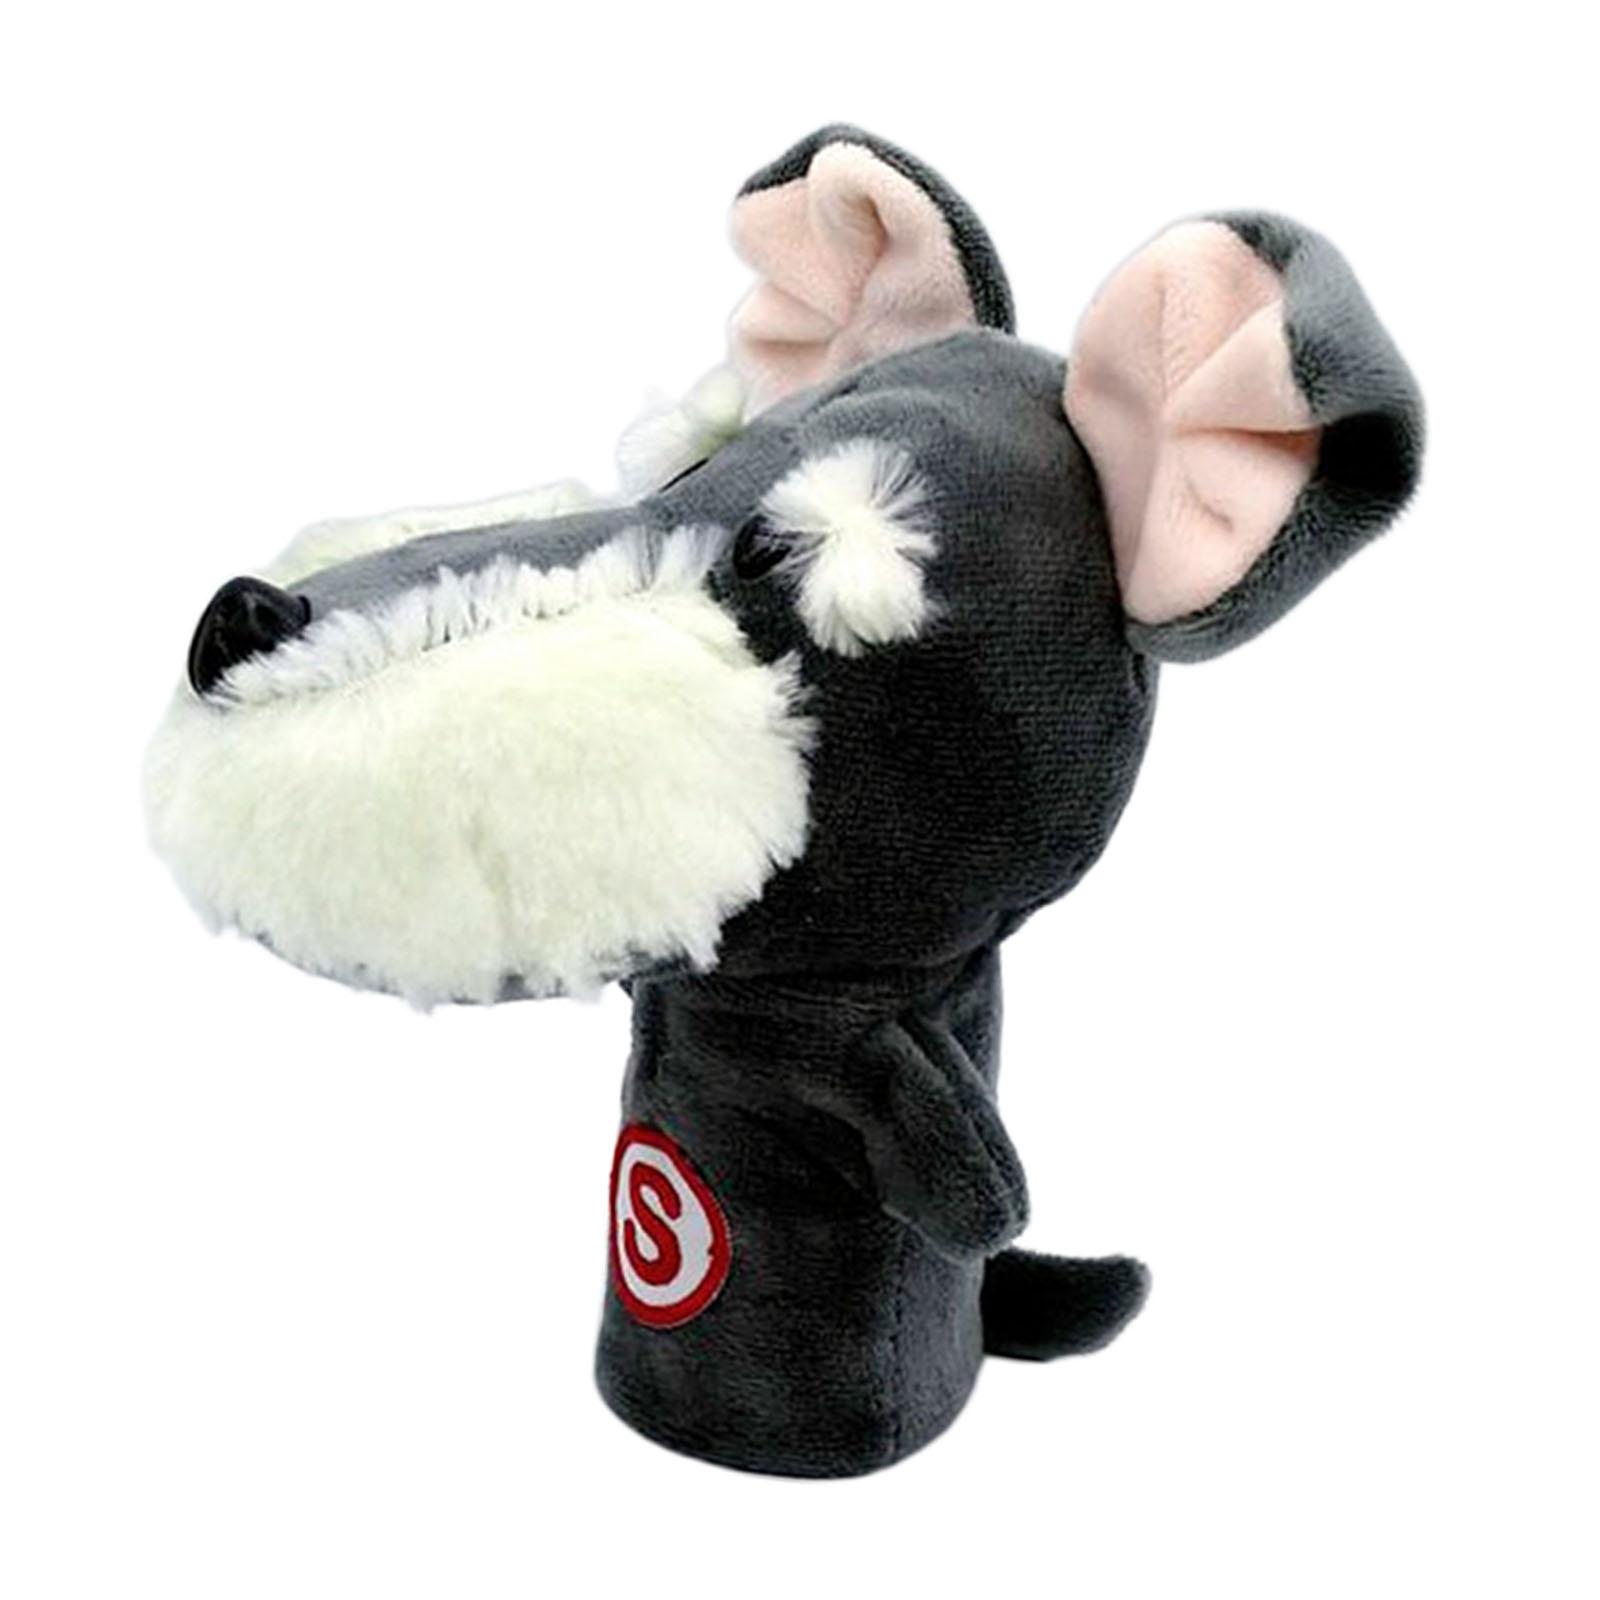 Novelty Plush Animal Golf Iron Headcover Wedges Club Head Cover Dog No.S